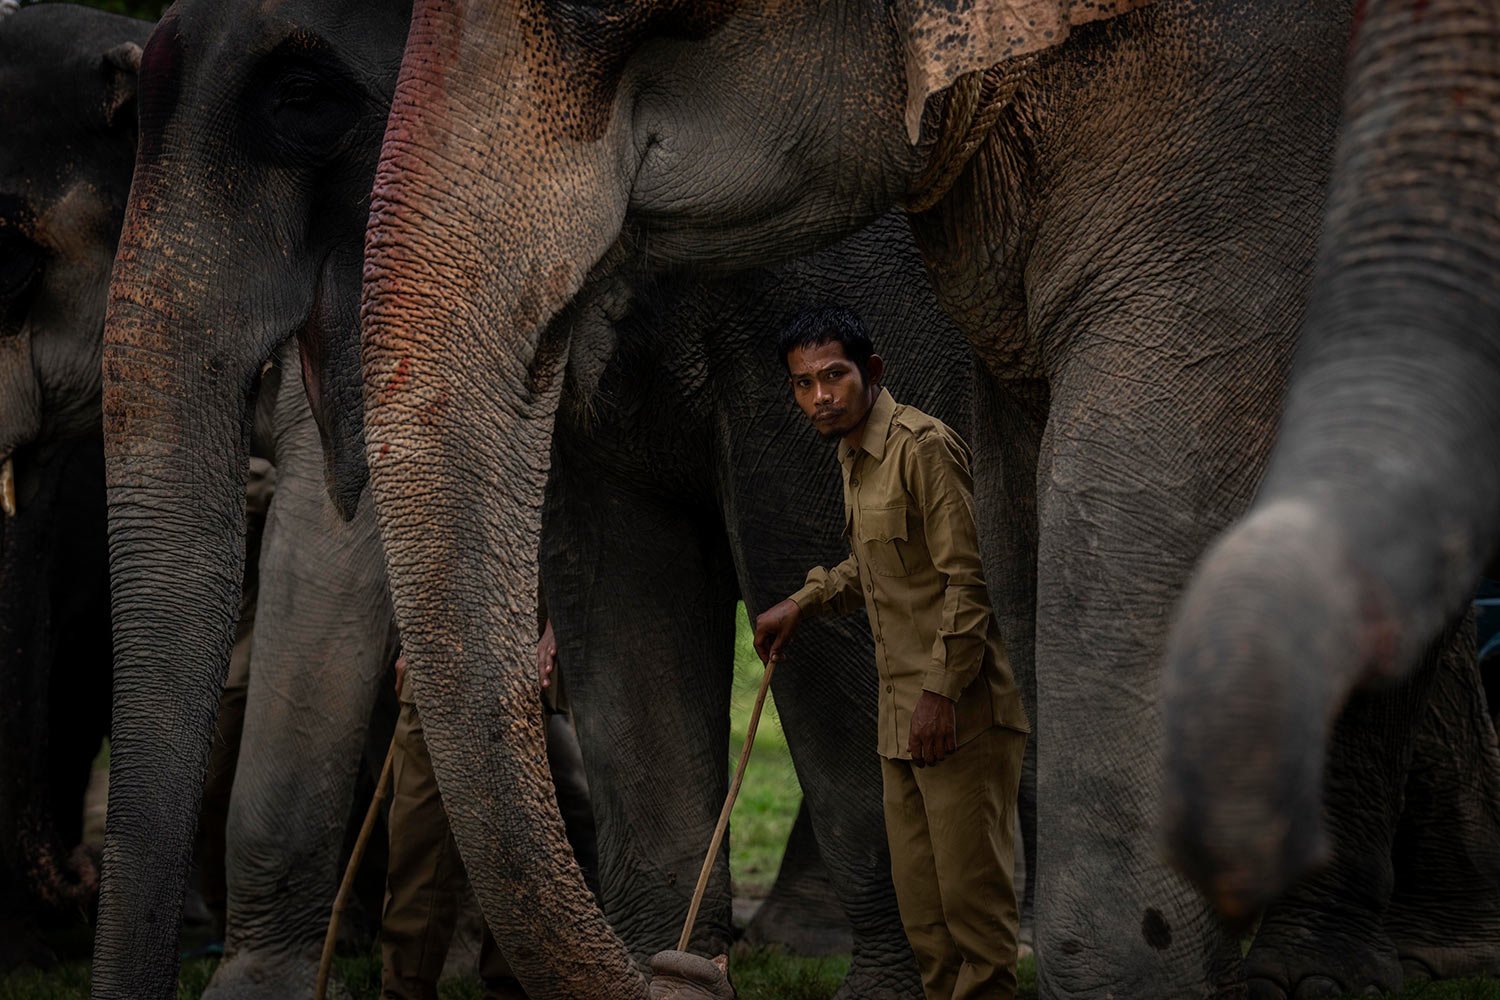  A mahout waits for tourists before the start of elephant safari for tourists in the Pobitora Wildlife Sanctuary, on the outskirts of Guwahati, northeastern Assam state, India, Tuesday, Oct. 11, 2022.  (AP Photo/Anupam Nath) 